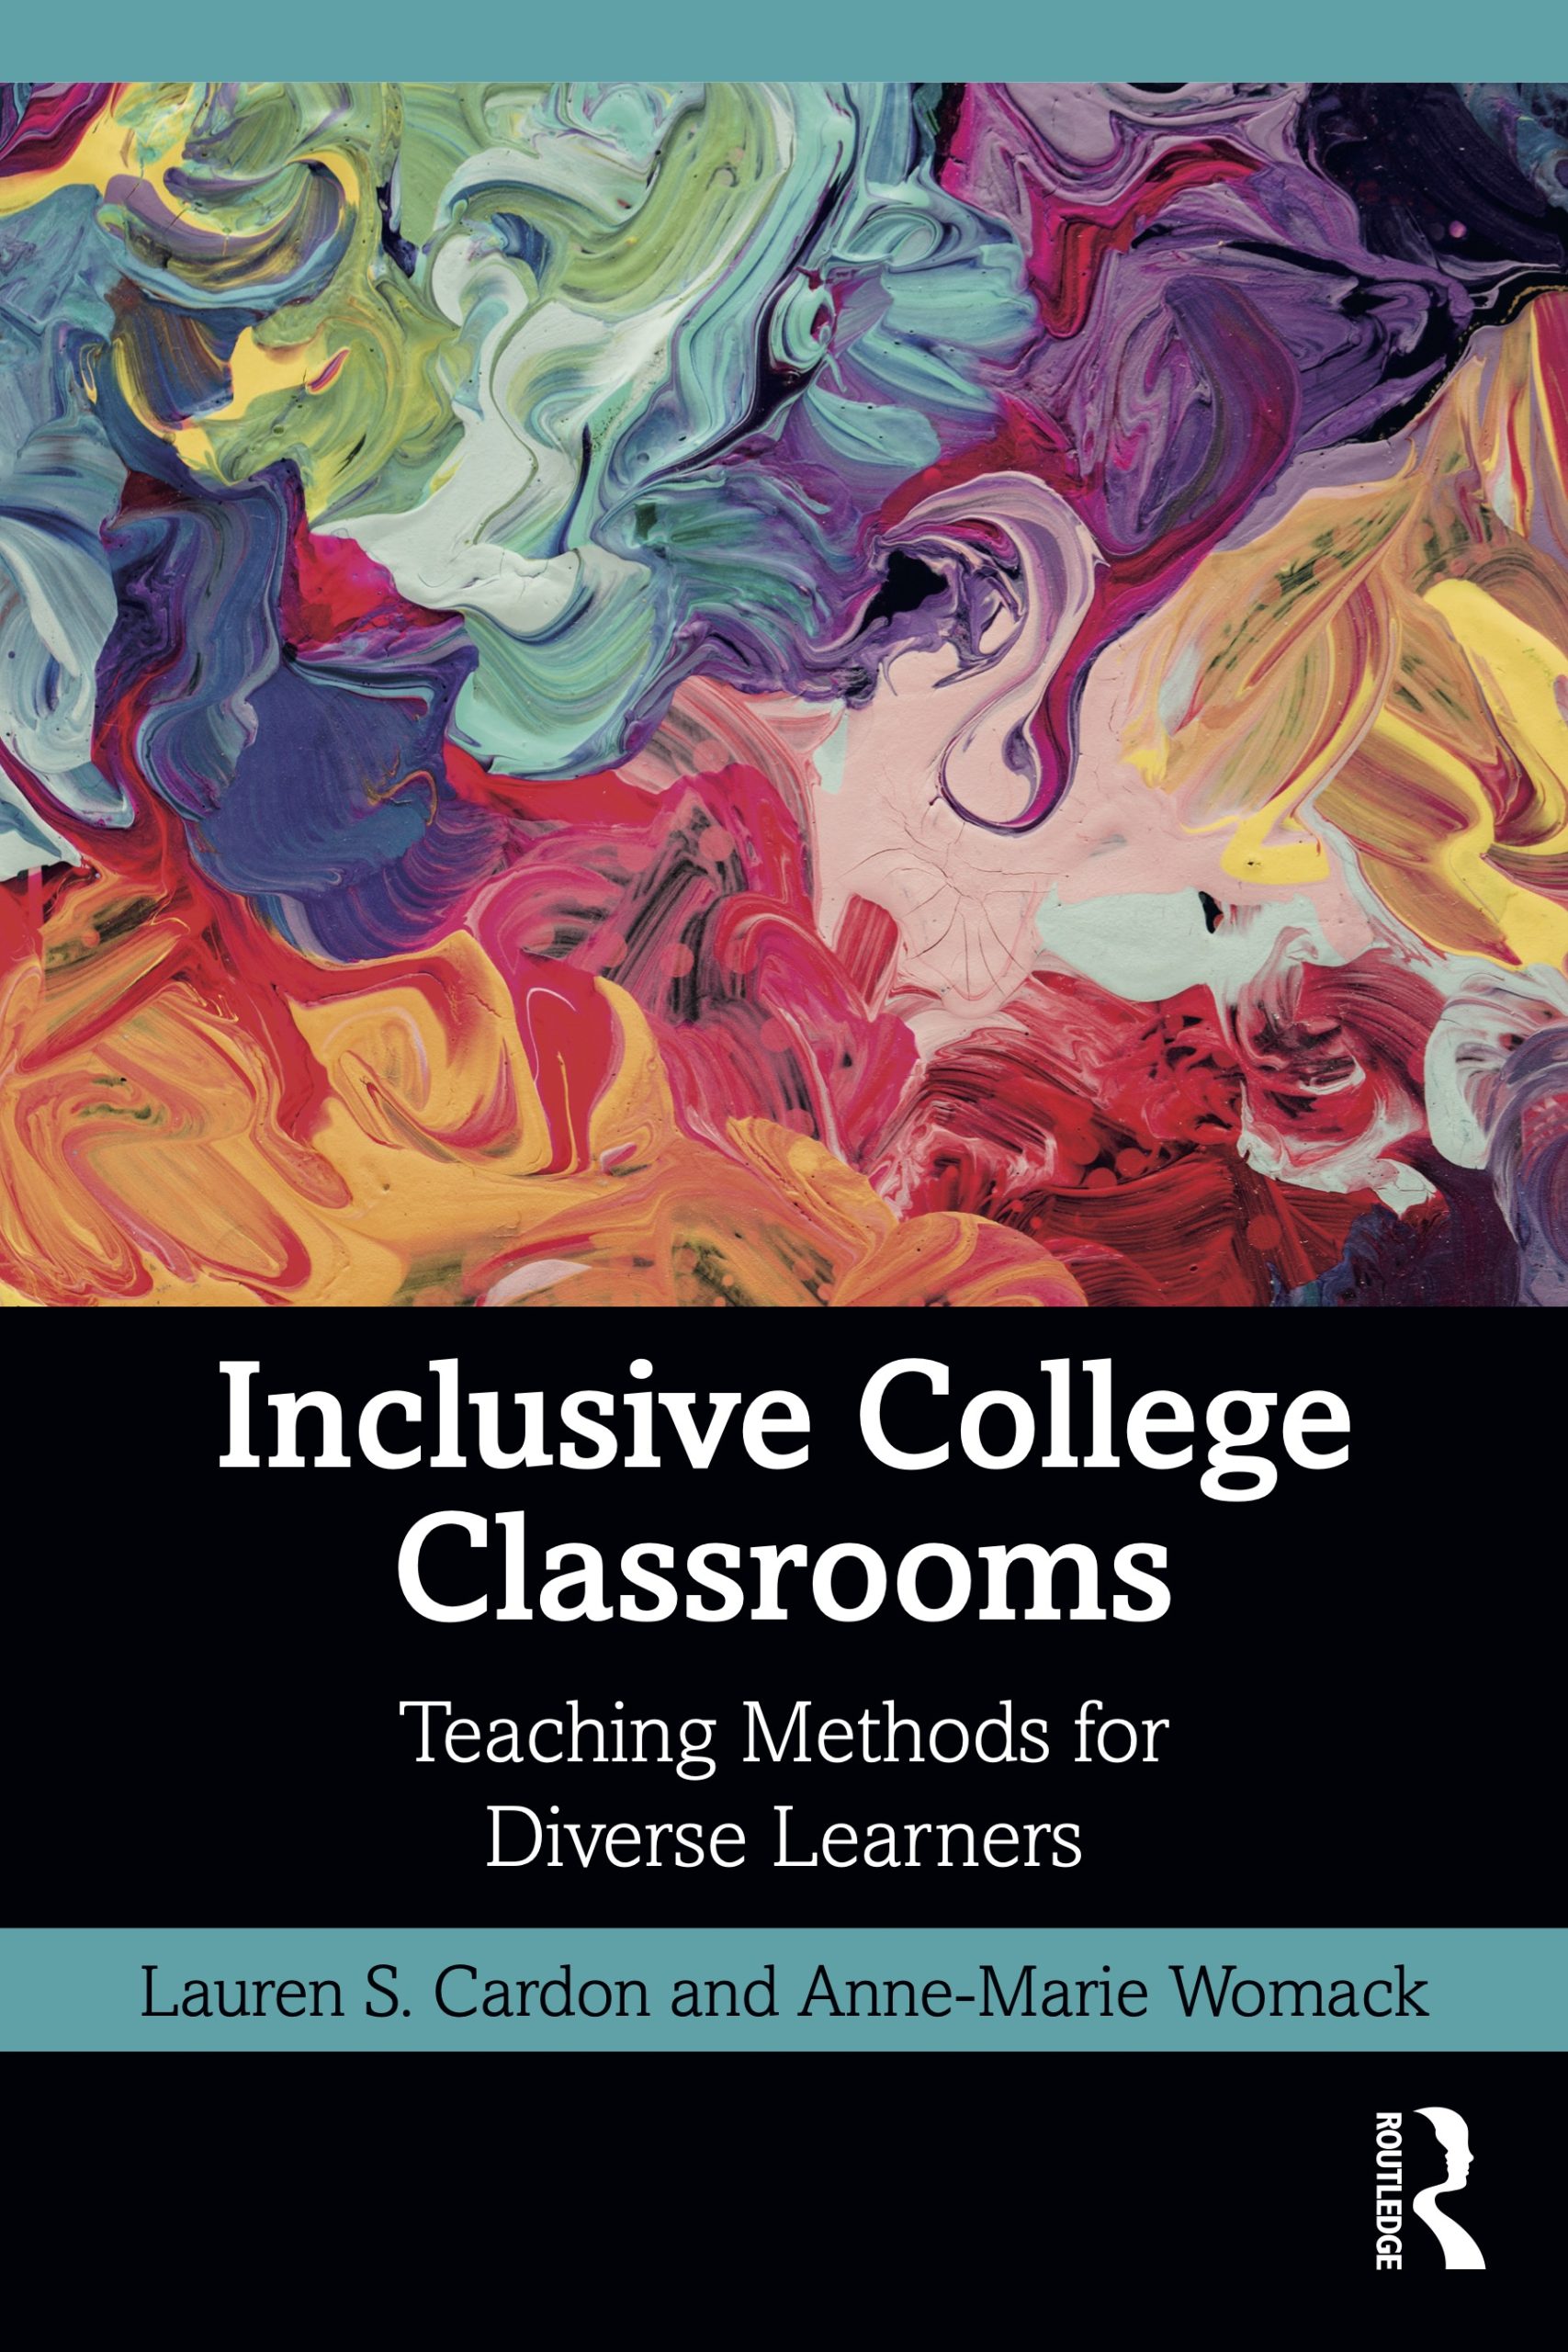 Book cover of Inclusive College Classrooms: Teaching Methods for Diverse Learners.